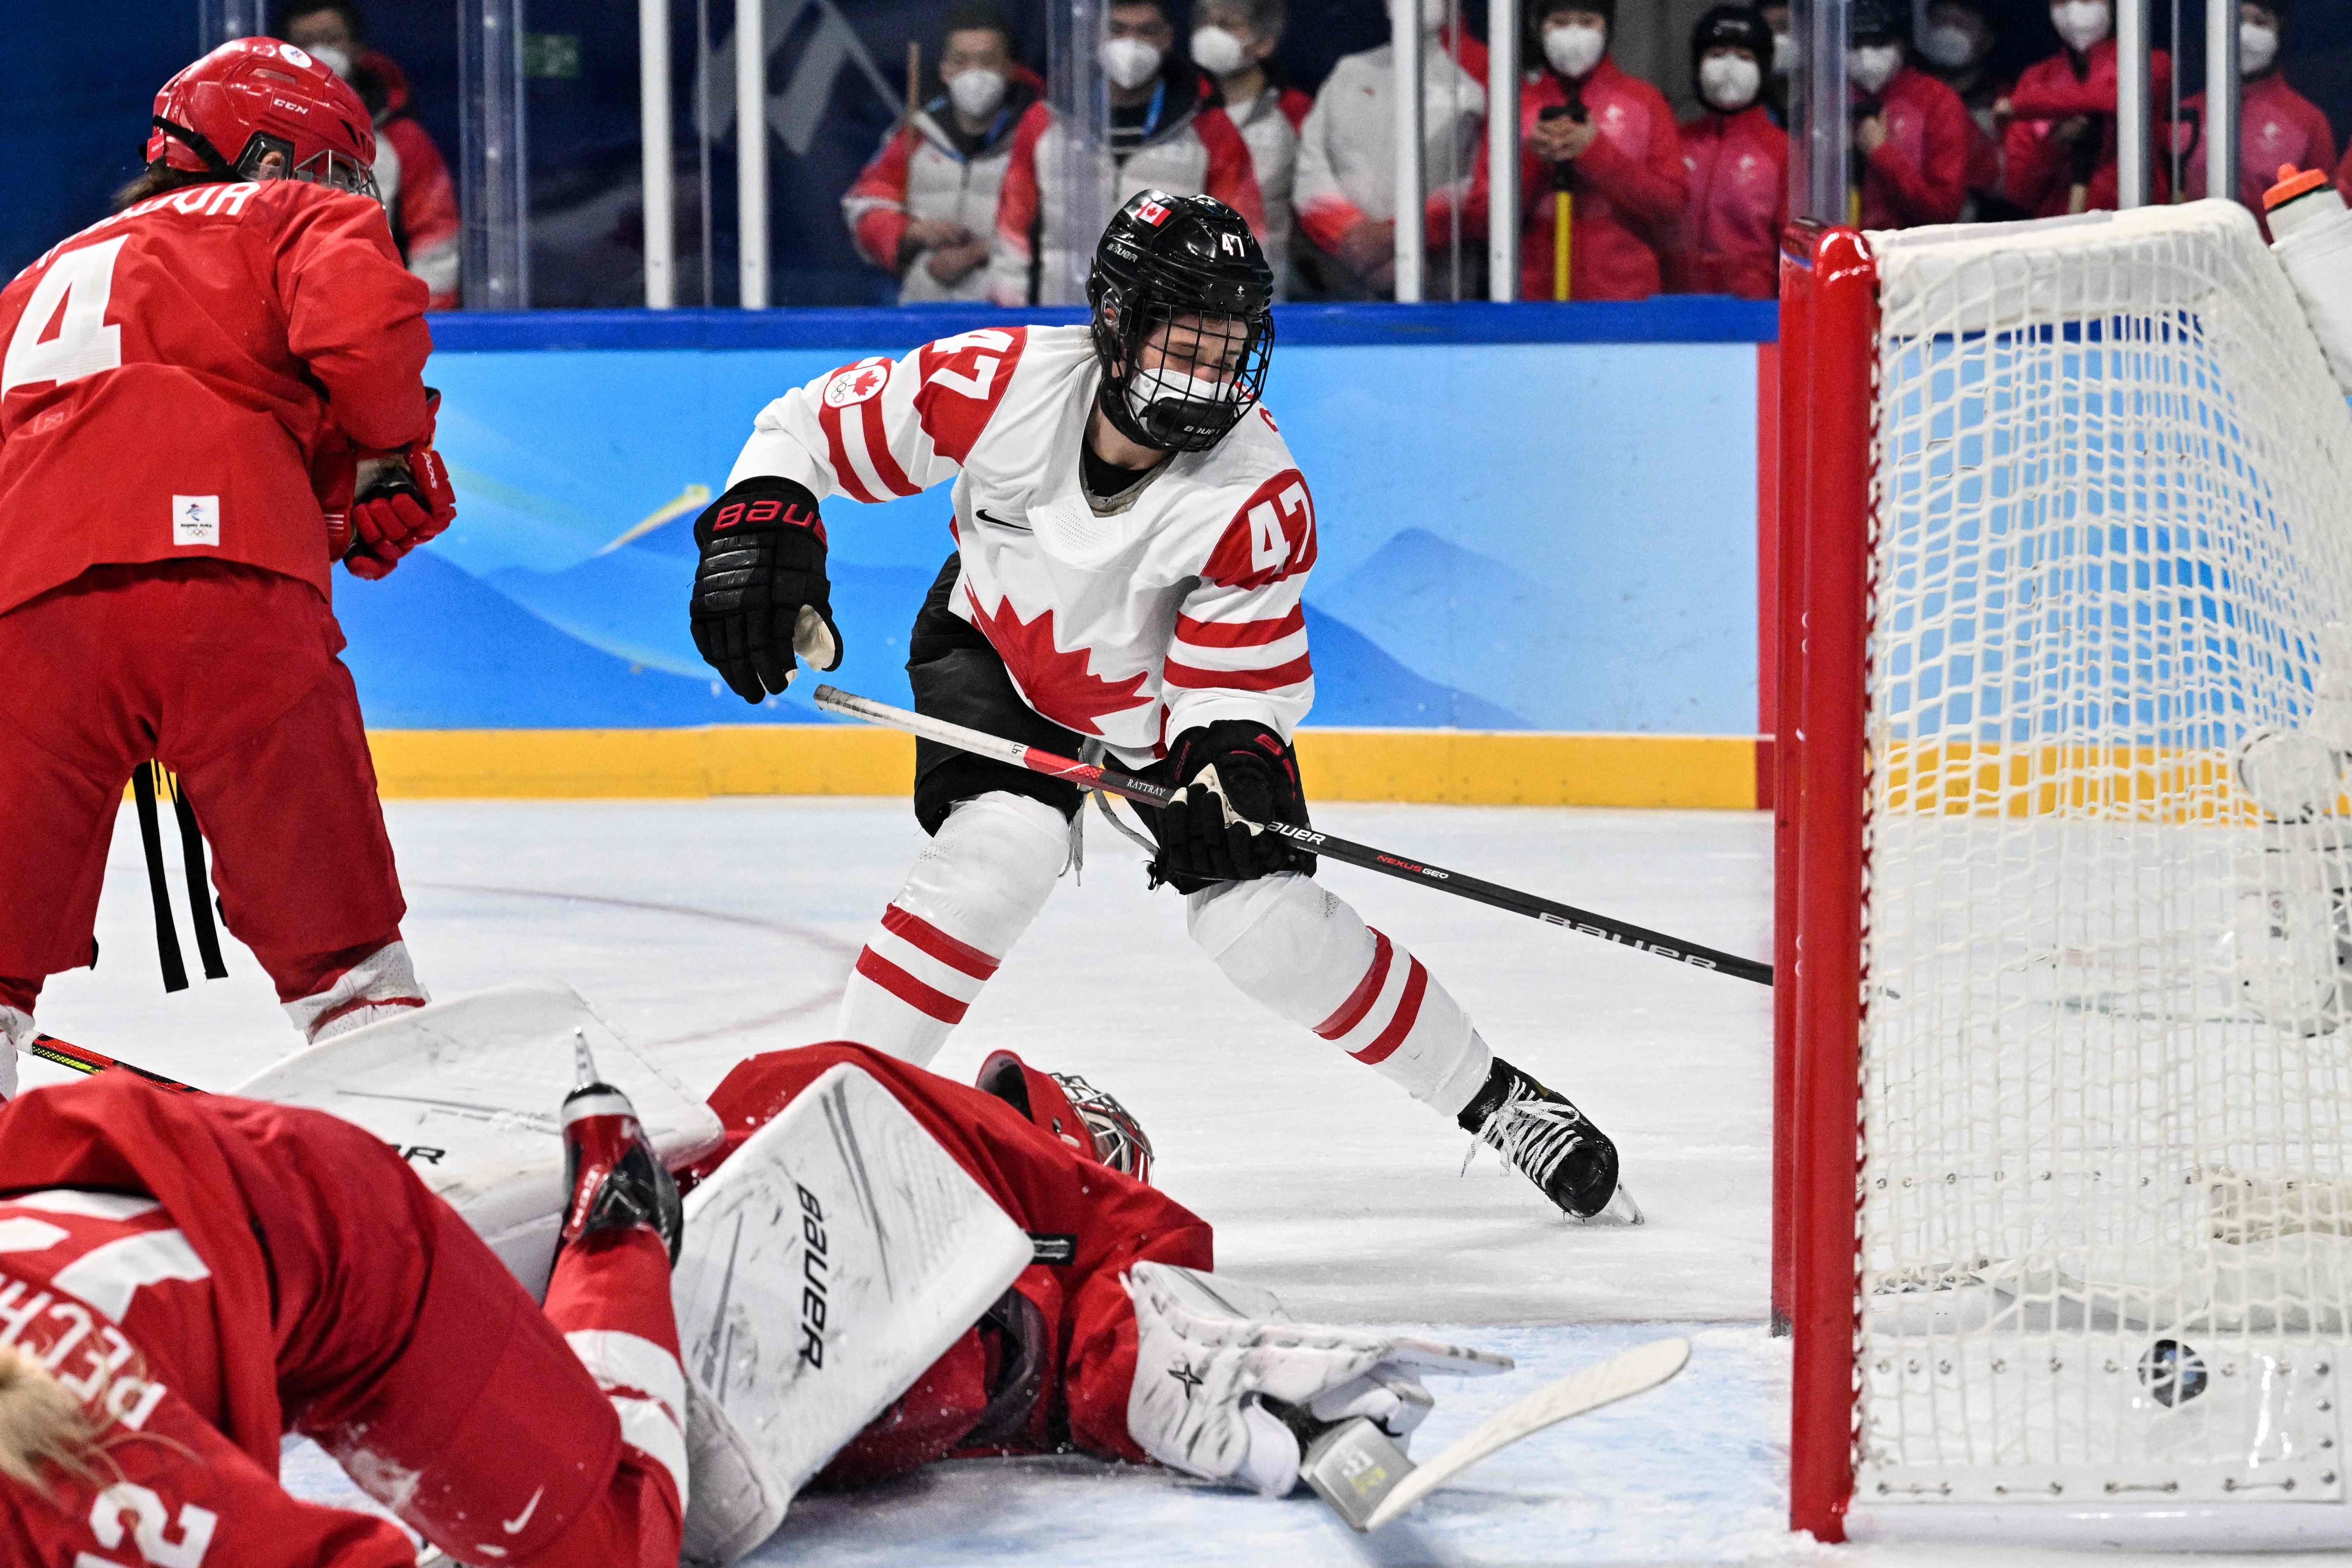 Ice hockey-Canada beat Russians after refusing to take the ice over COVID  results